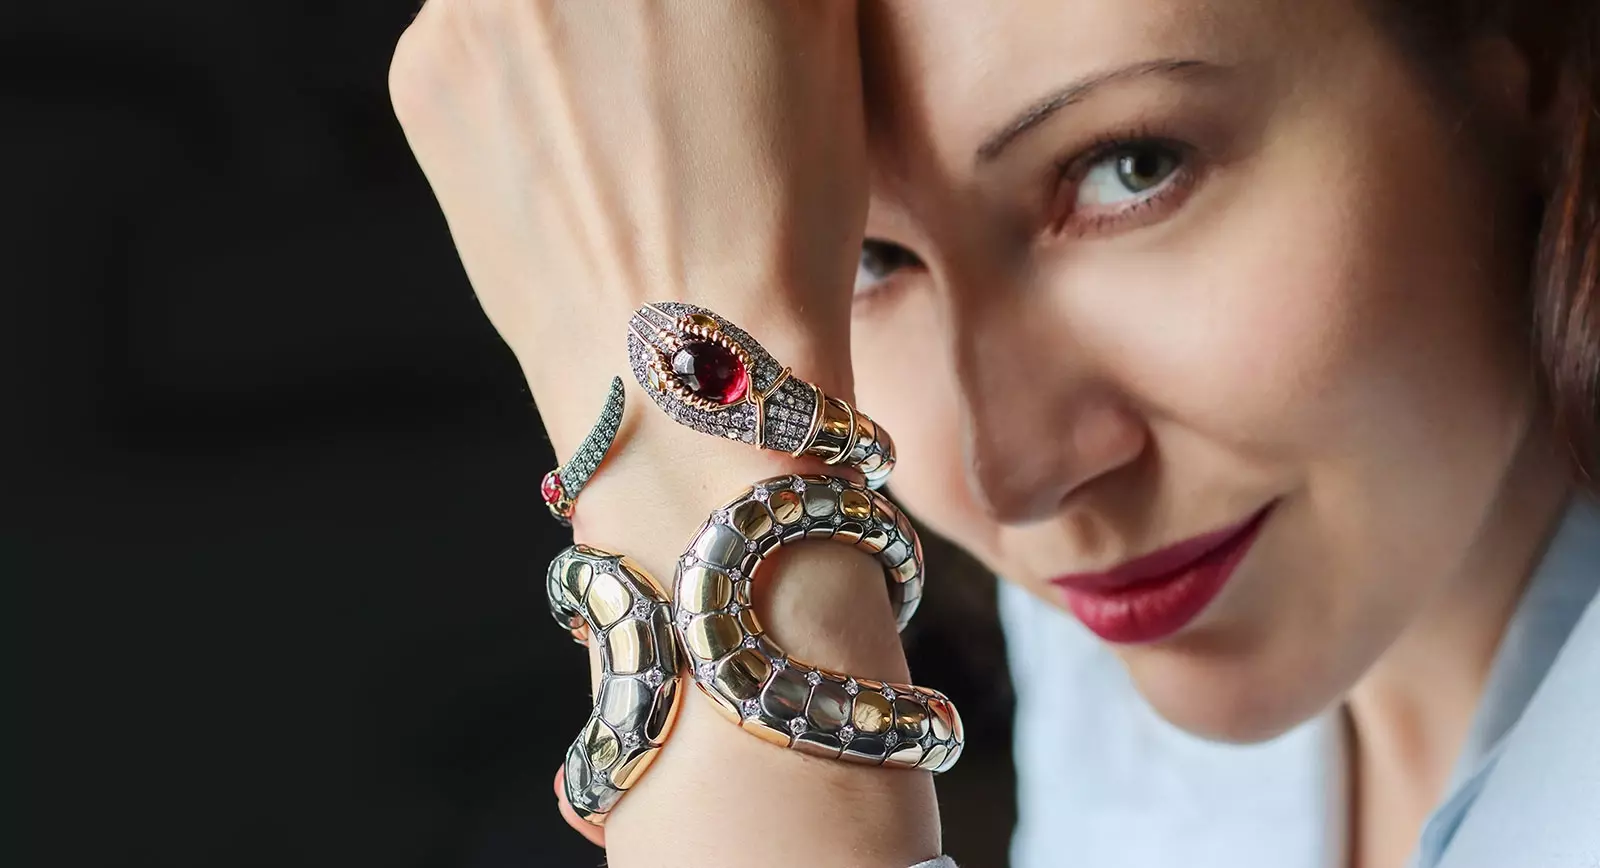 Katerina Perez wearing Elie Top snake bangle with a cabochon rubellite